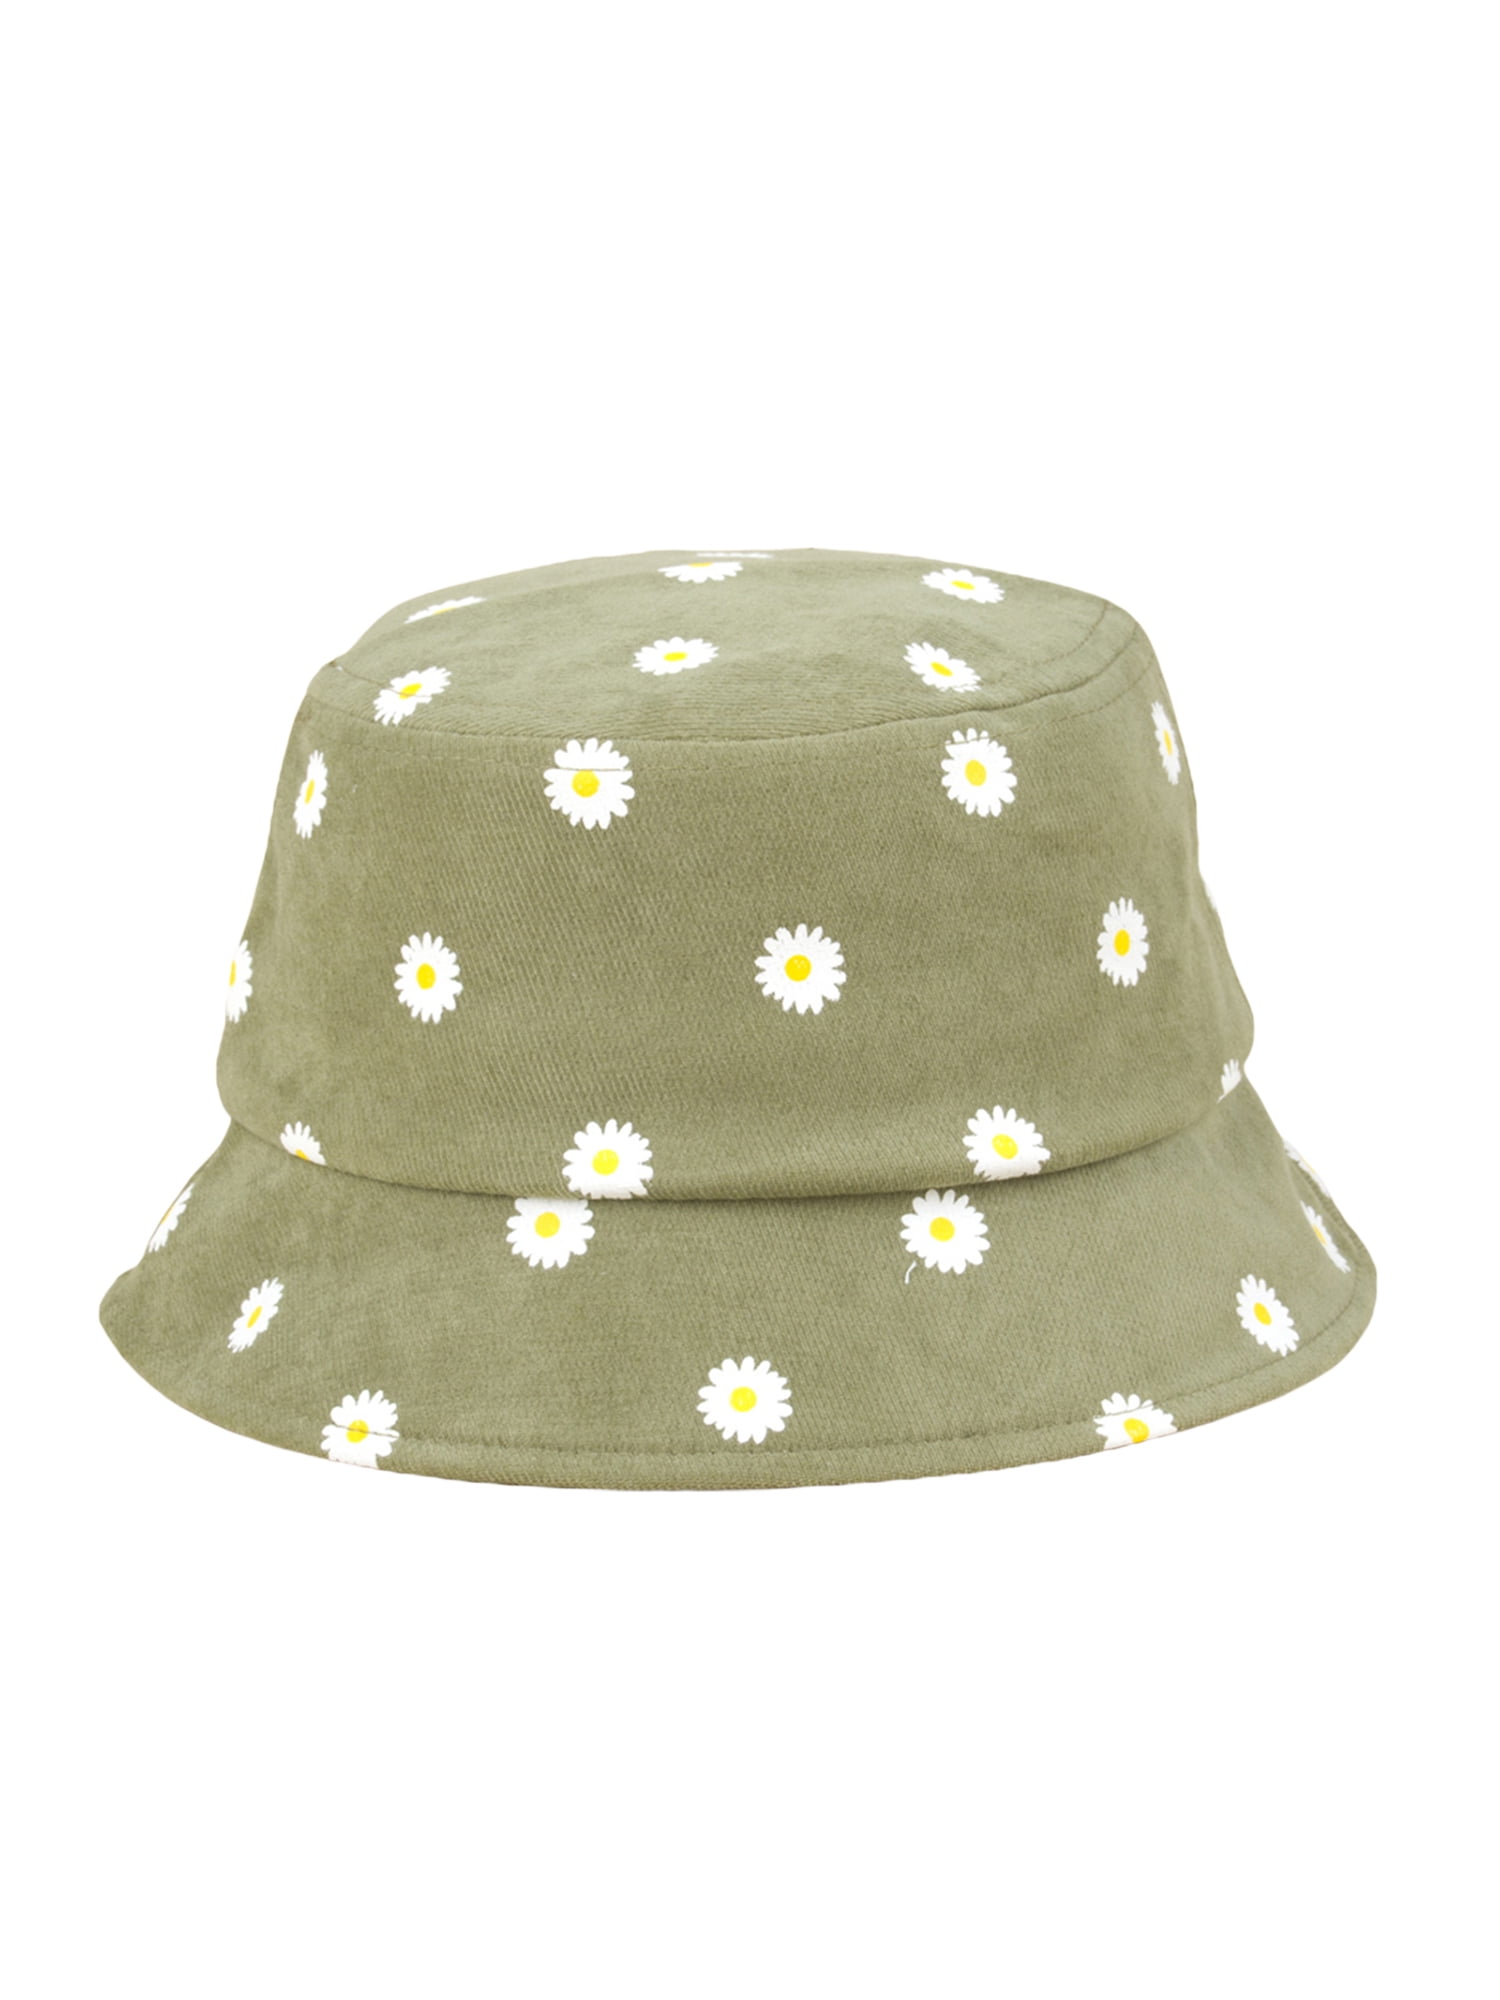 Toddler Baby Girl Sun Protection Cap Kids Daisy Pattern Fisherman Hat with  Windproof Strap Summer Sun Hat for Little Girl (Yellow, One Size) 